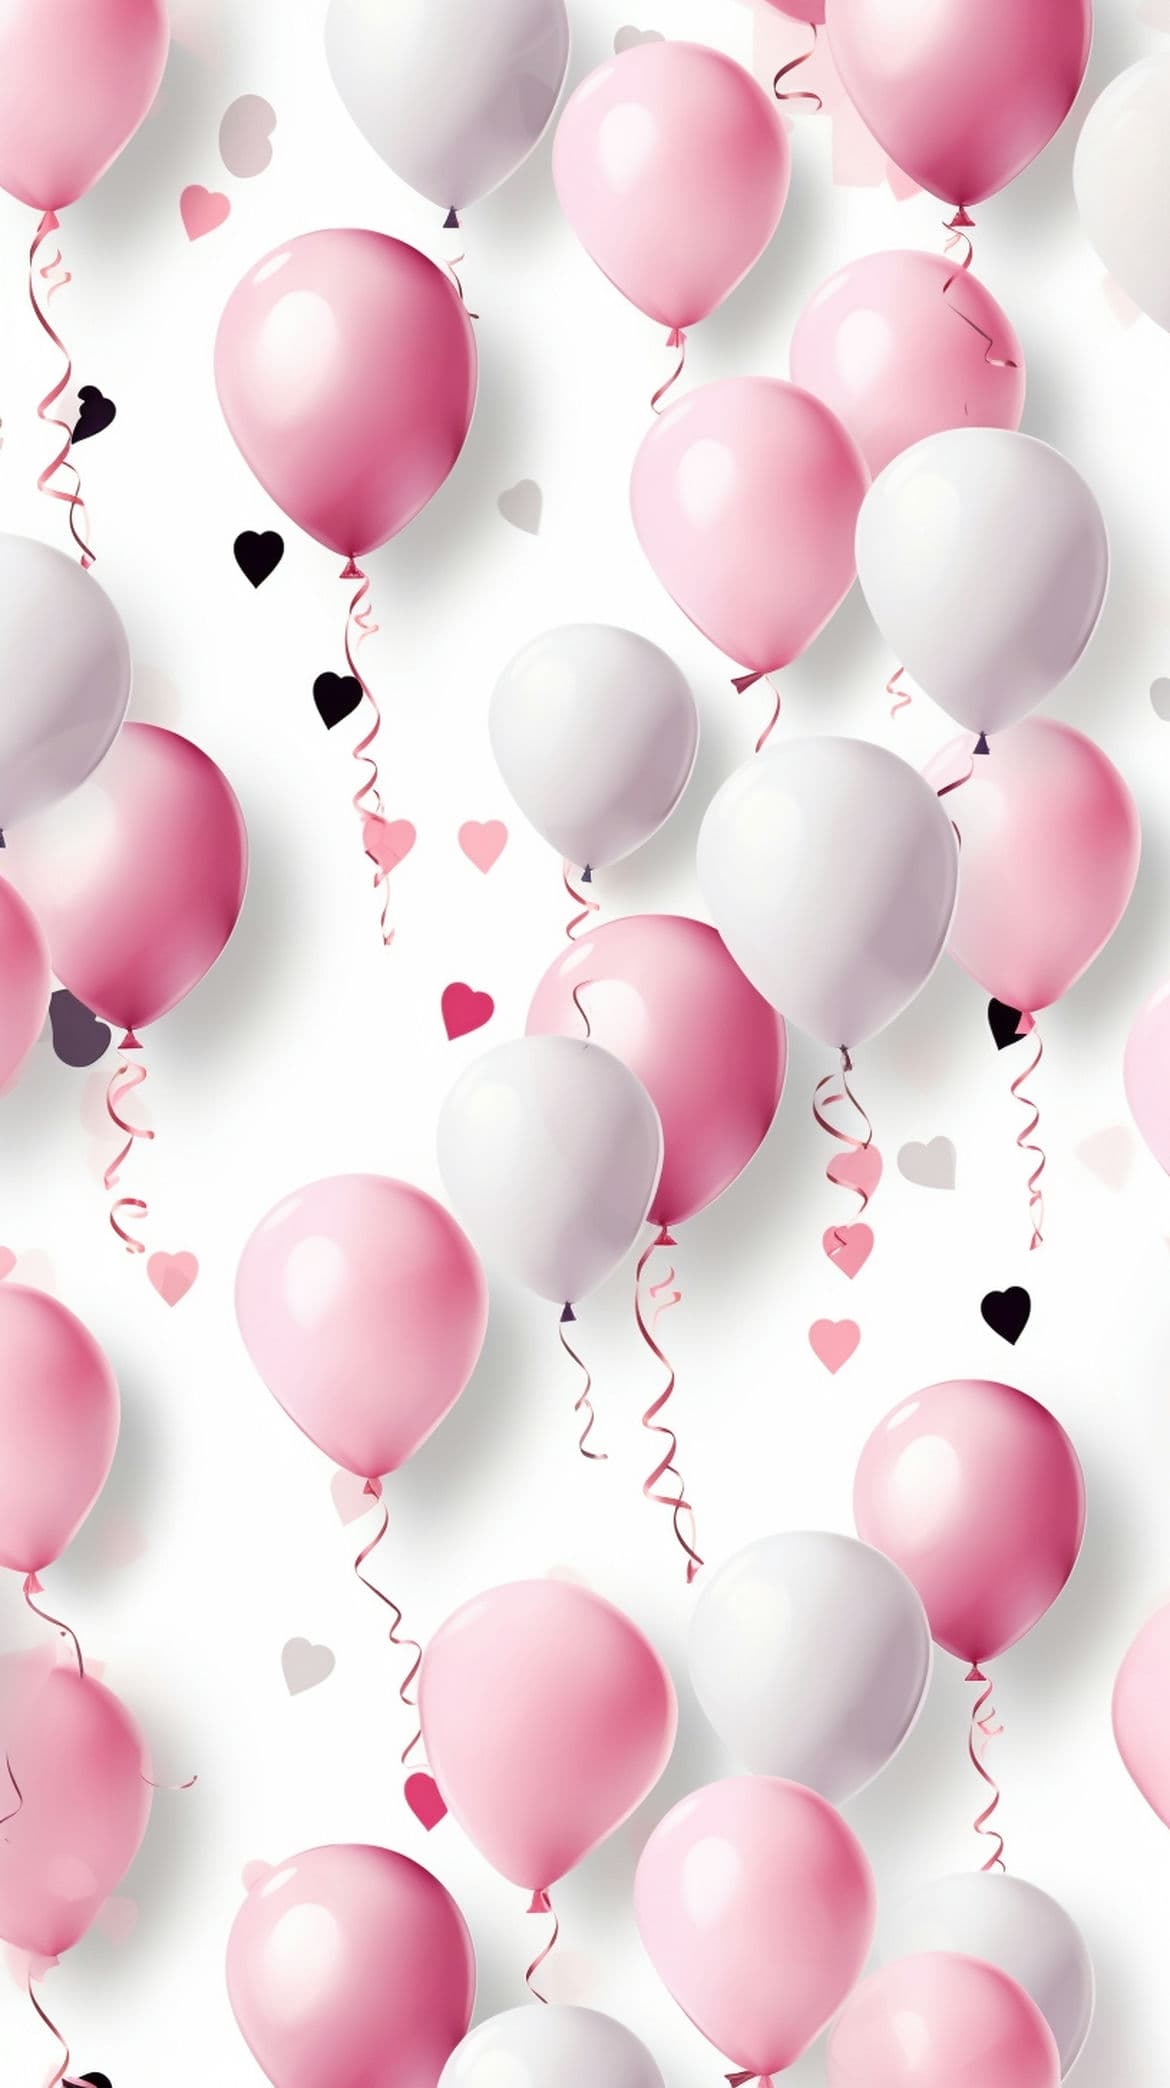 Pink Balloons wallpaper 1080x1920 for your Android phone - Balloons, birthday